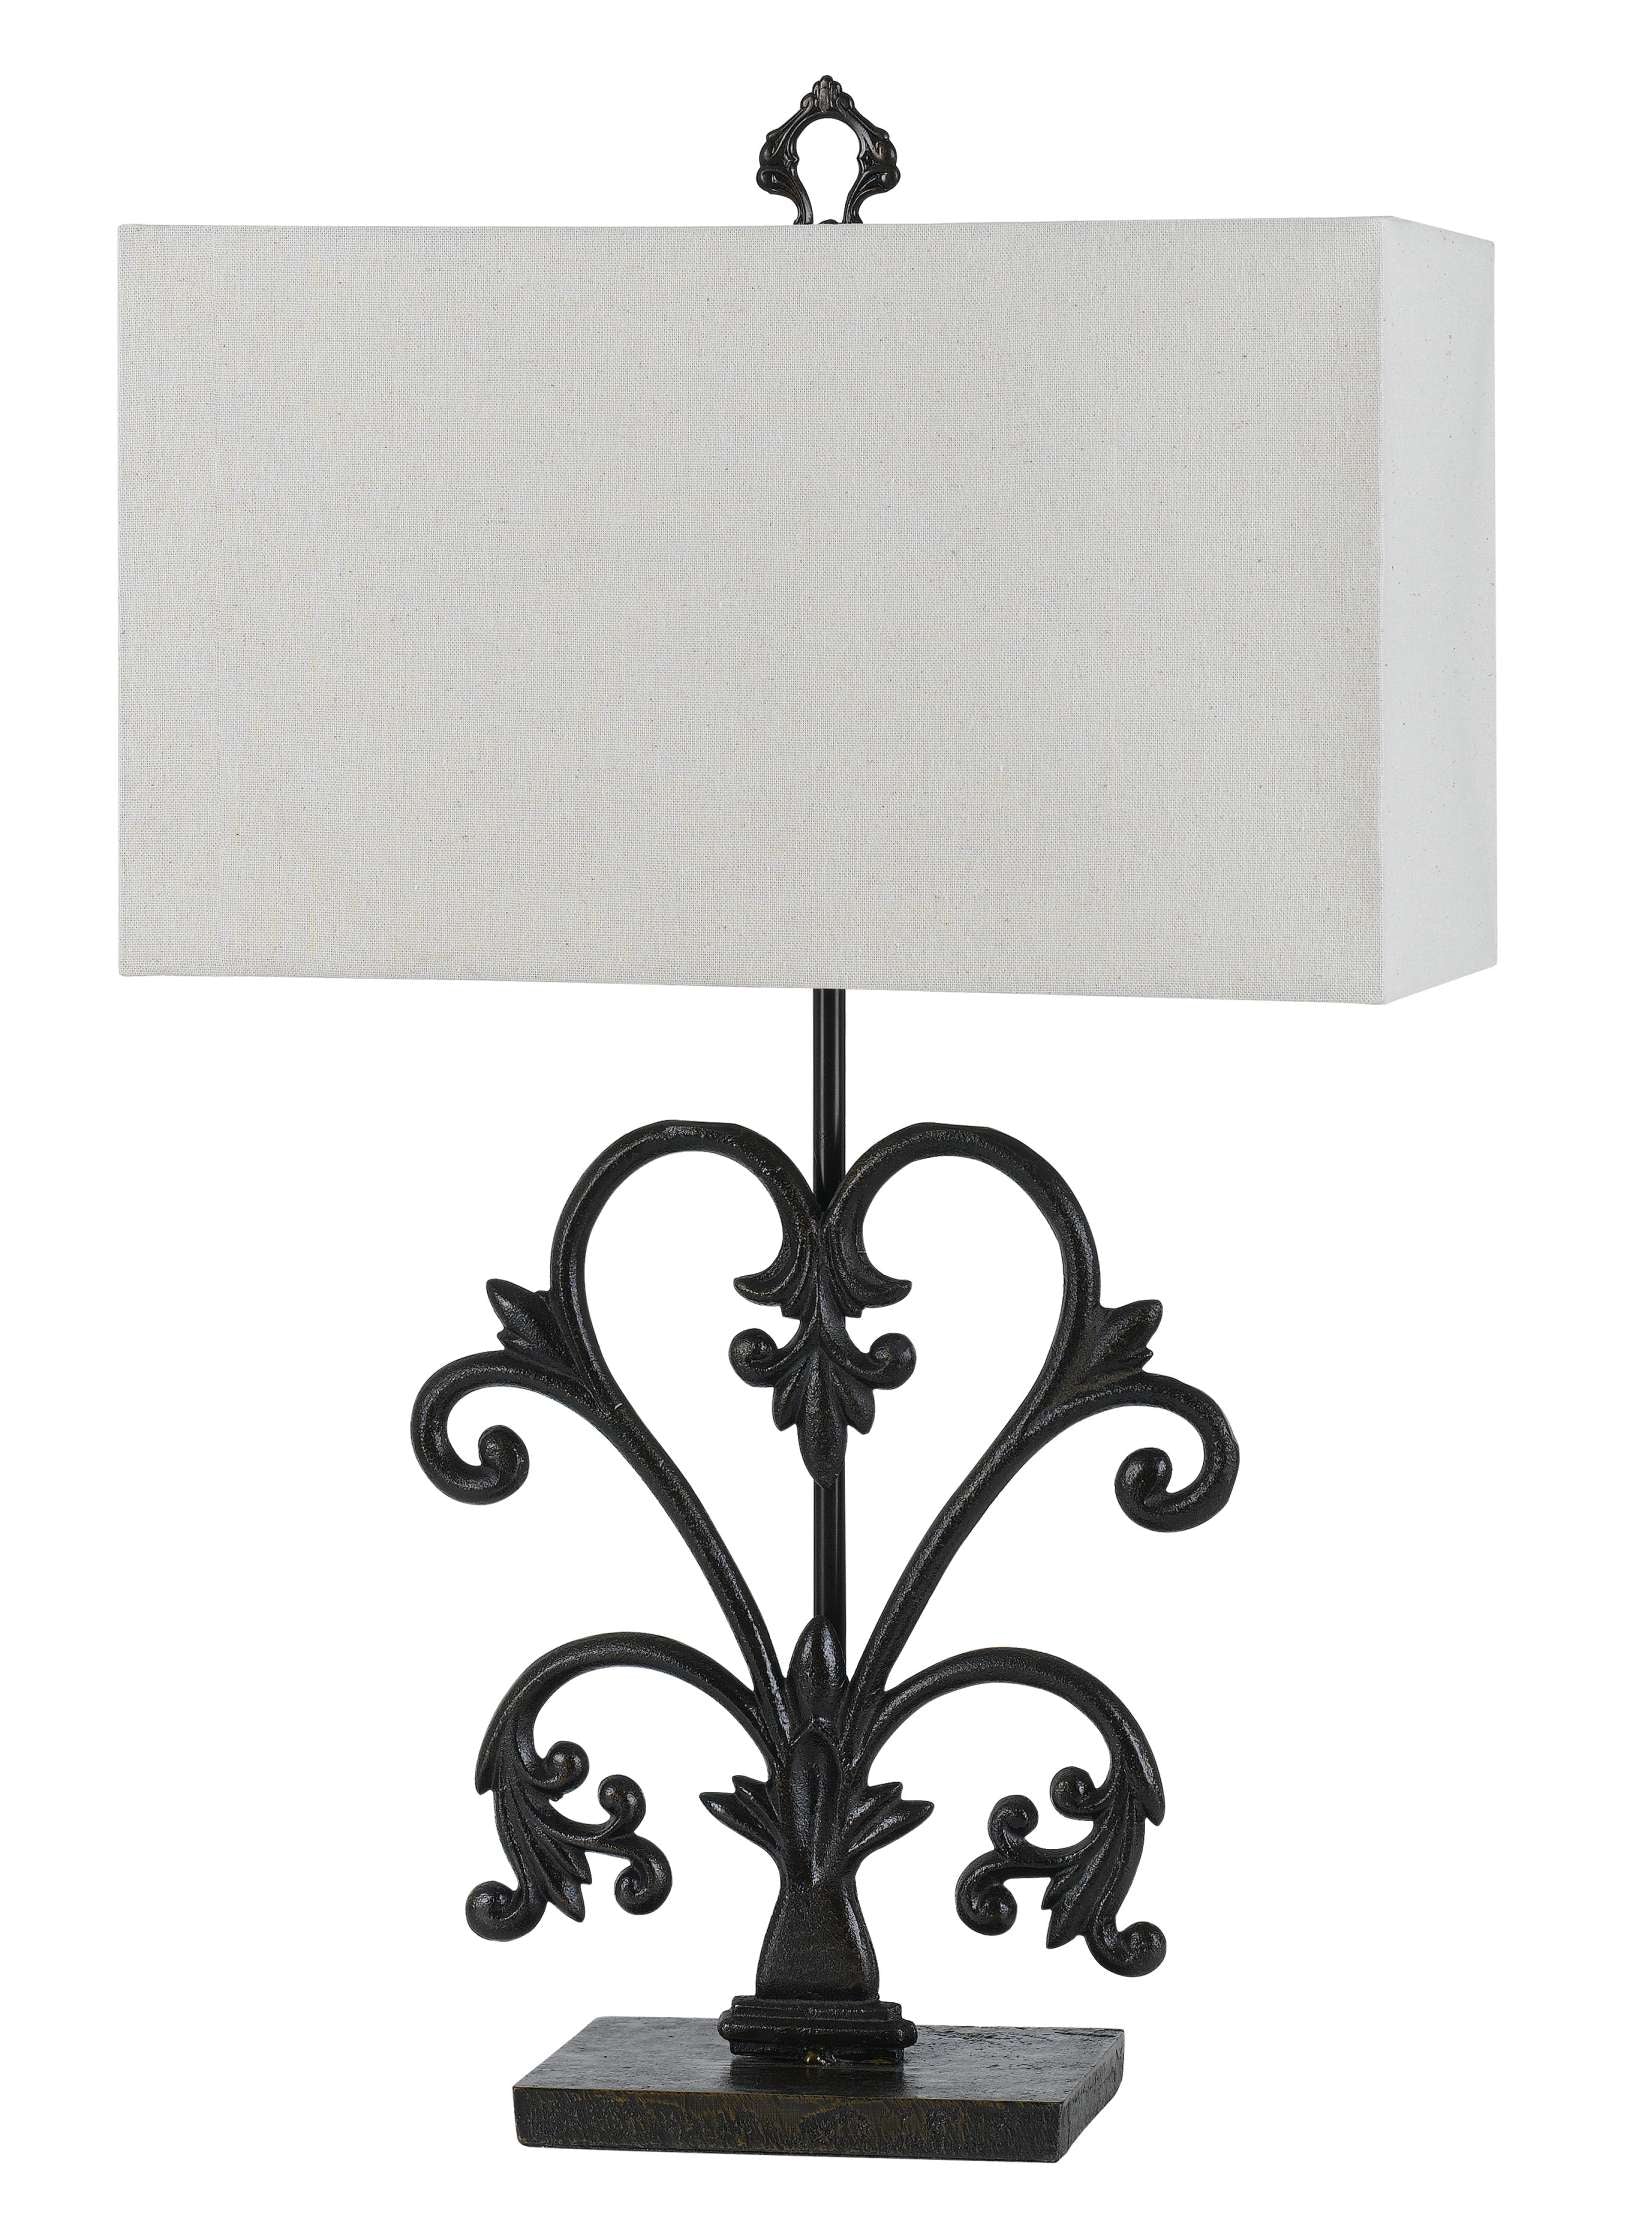 Rectangular Shade Table Lamp With Scrolled Metal Base, Off White And Black By Benzara